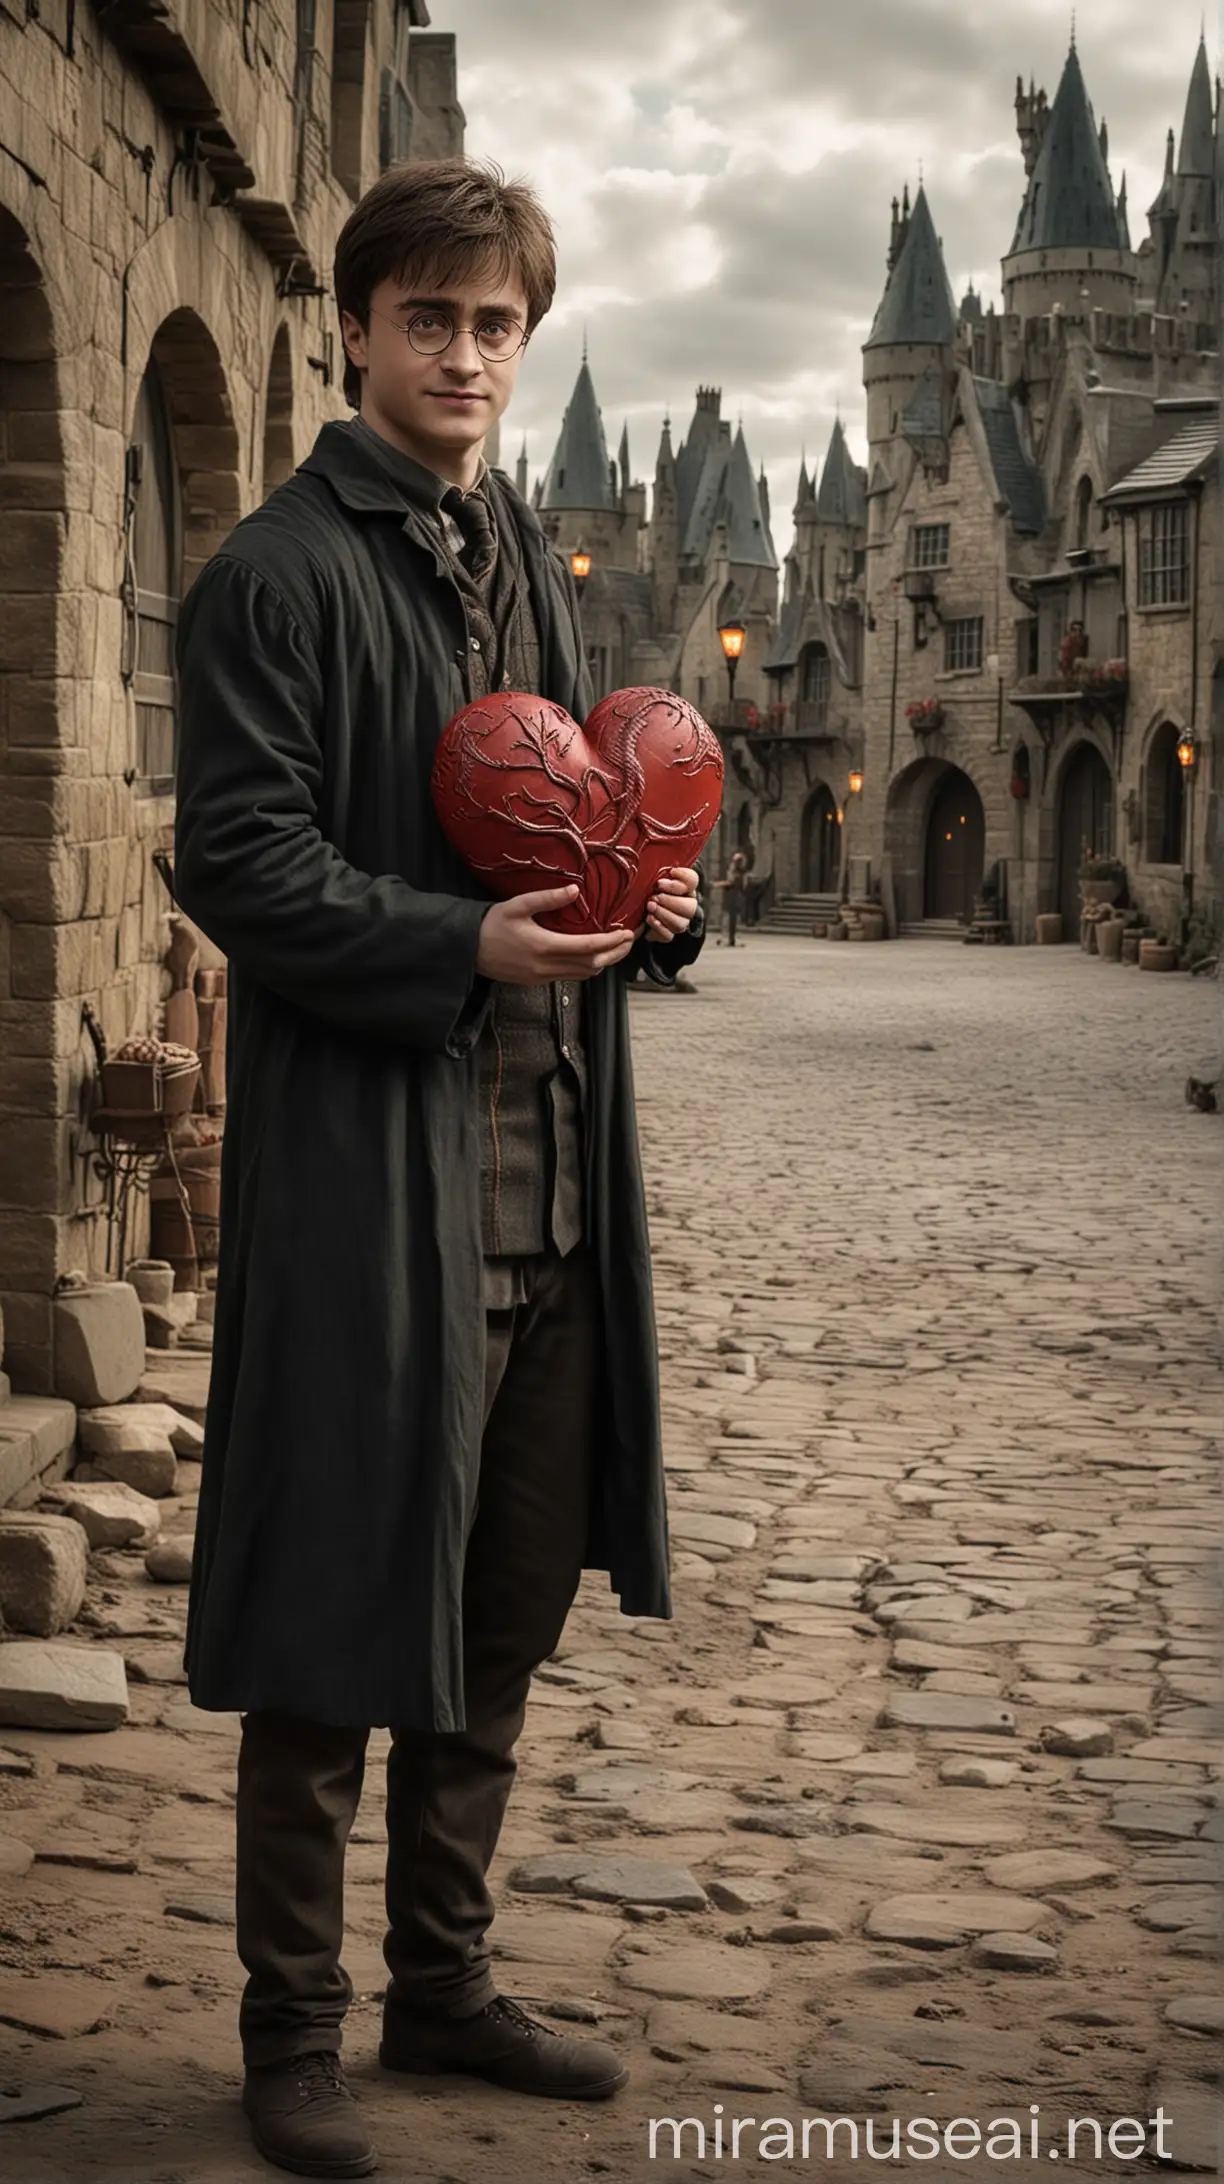 Harry Potter Holding Heart at Game of Thrones Location with House of the Dragon Elements